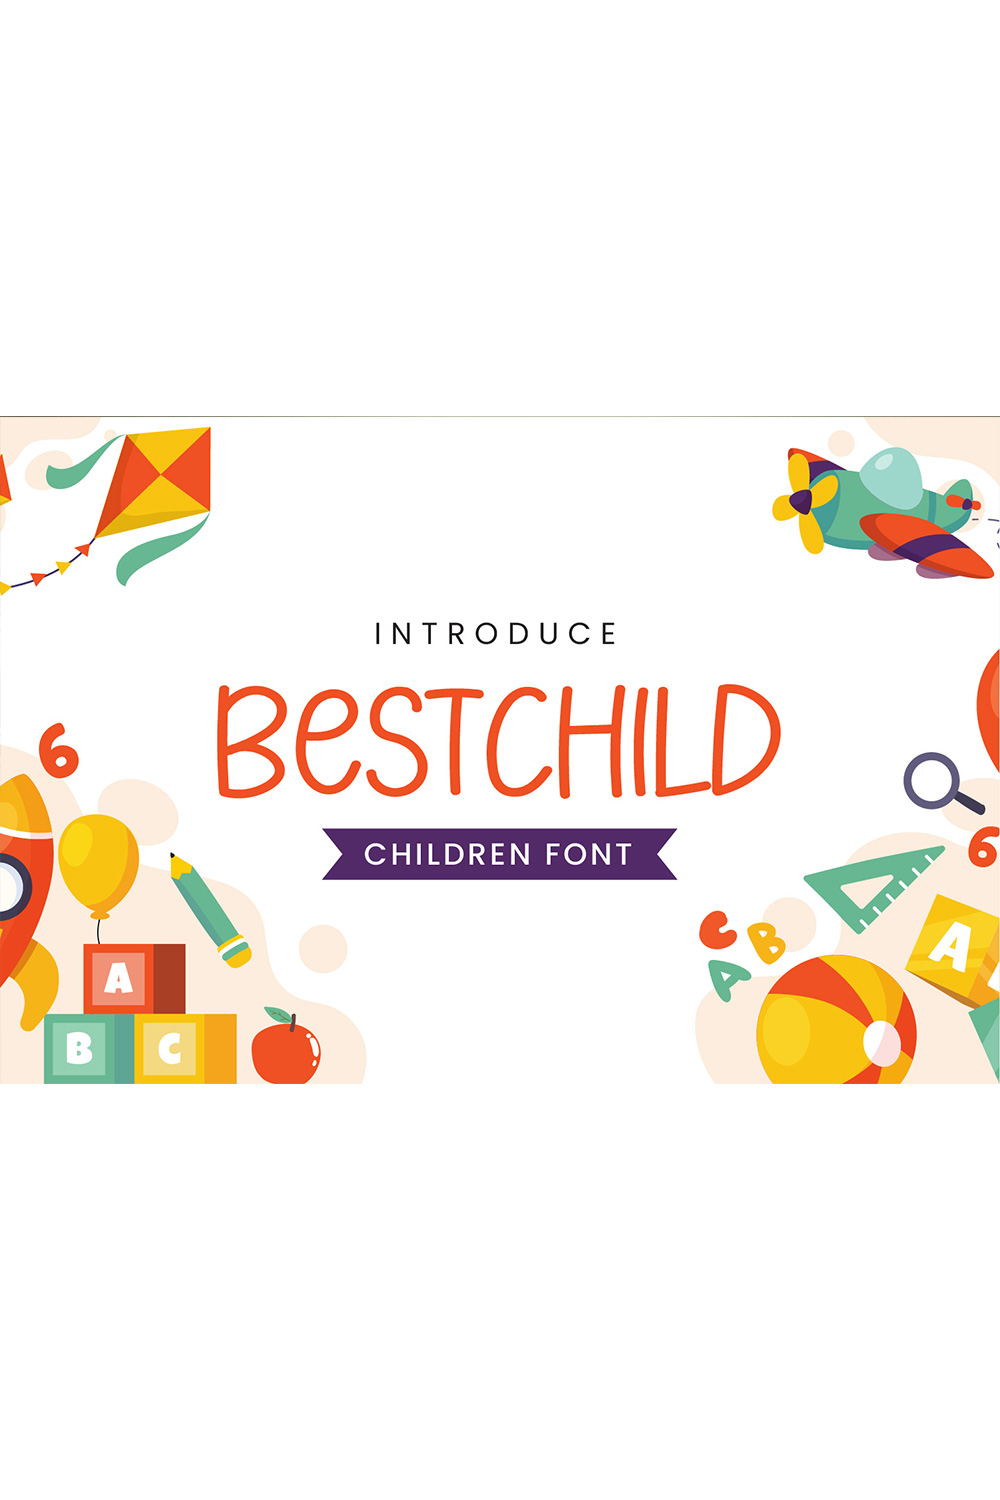 An image with text showing off the adorable Bestchild font